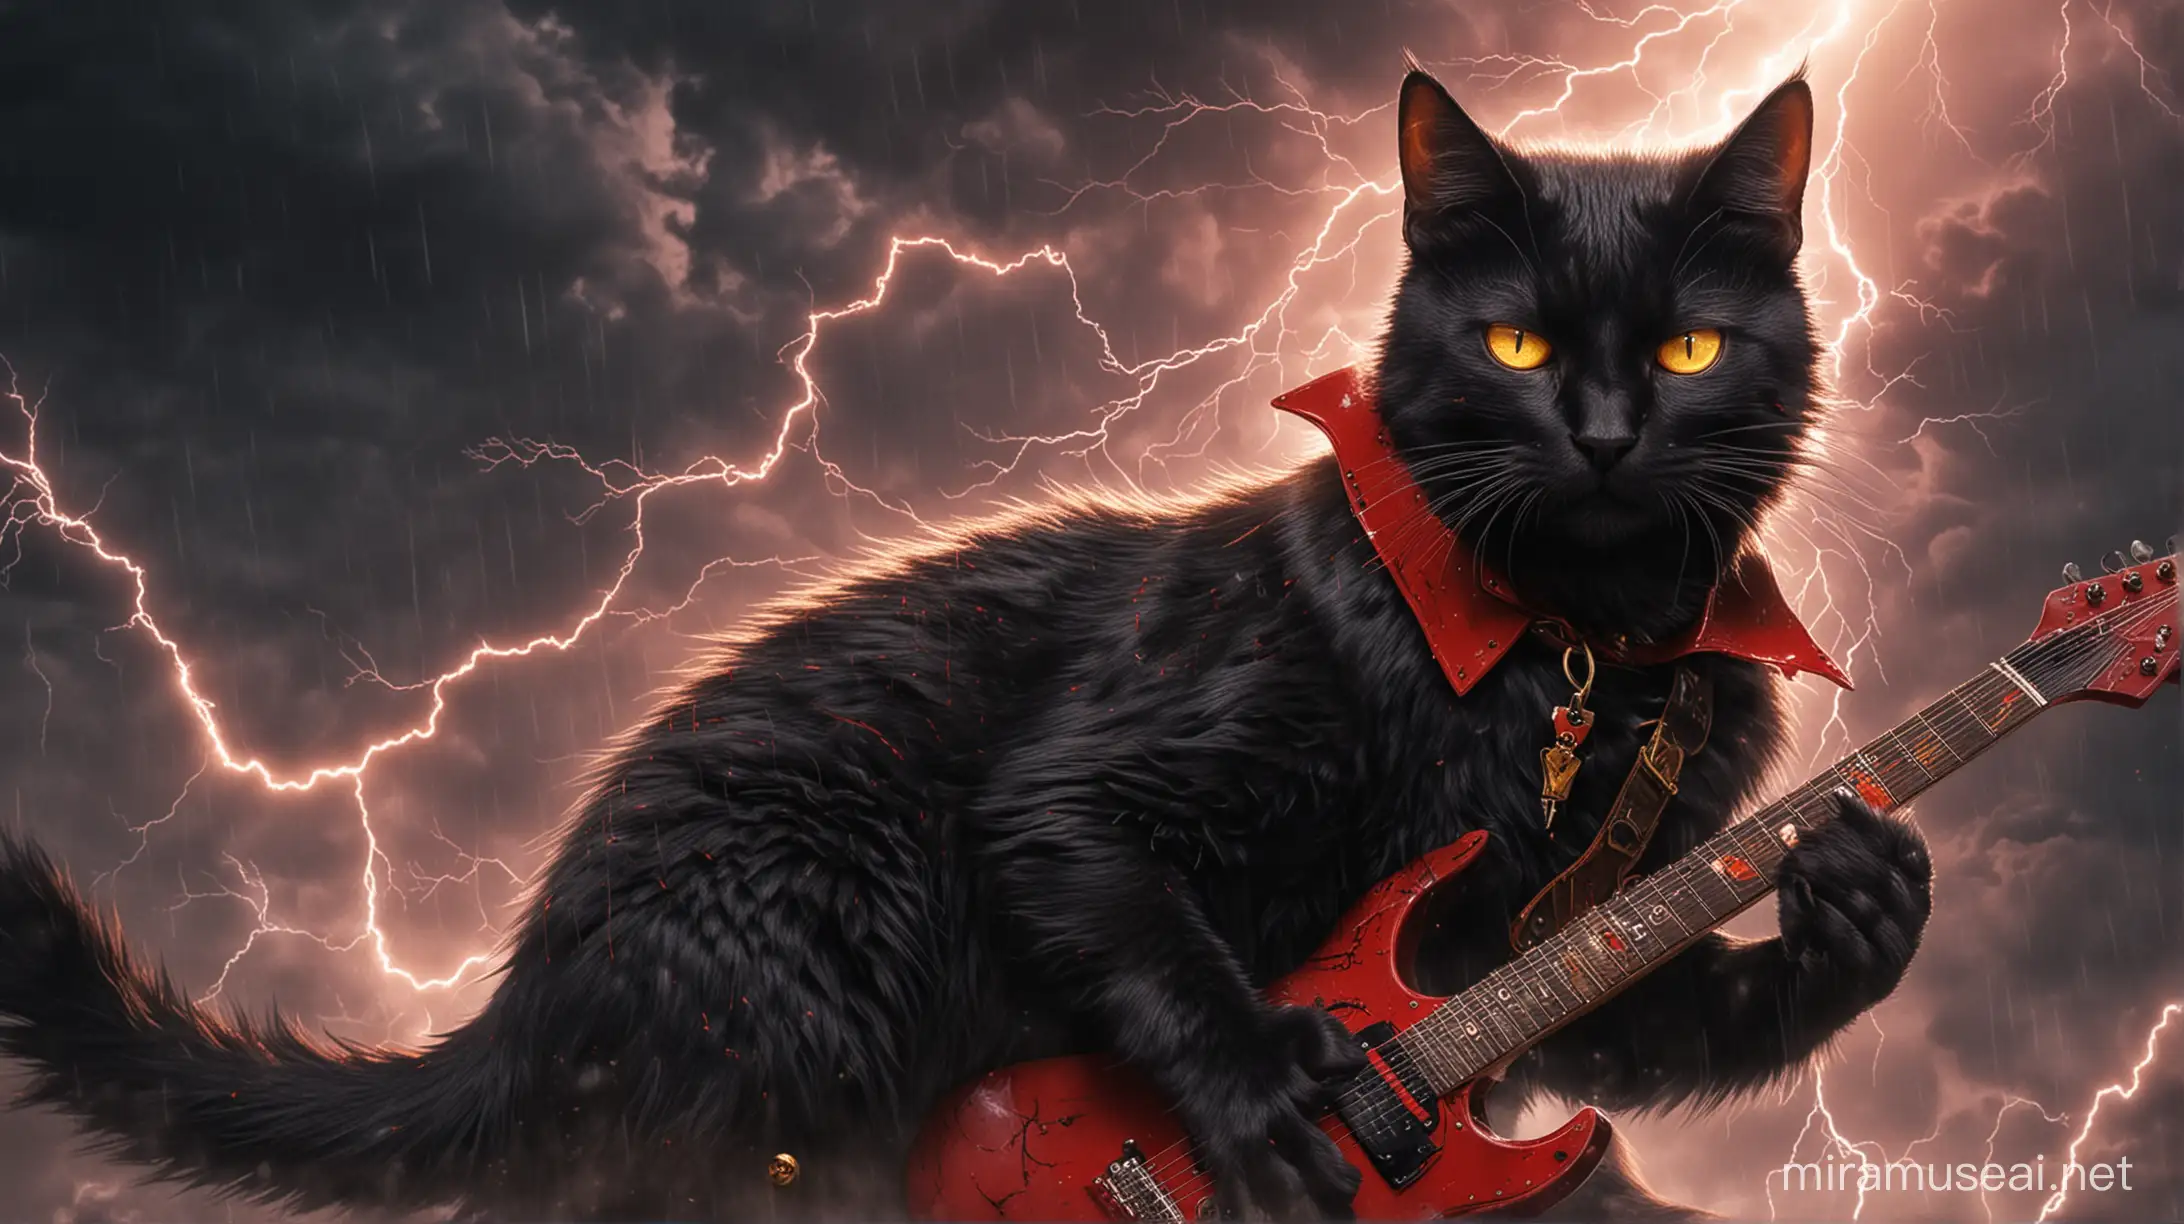 Mystical Black Cat with Fiery Collar in Stormy Guitar Serenade